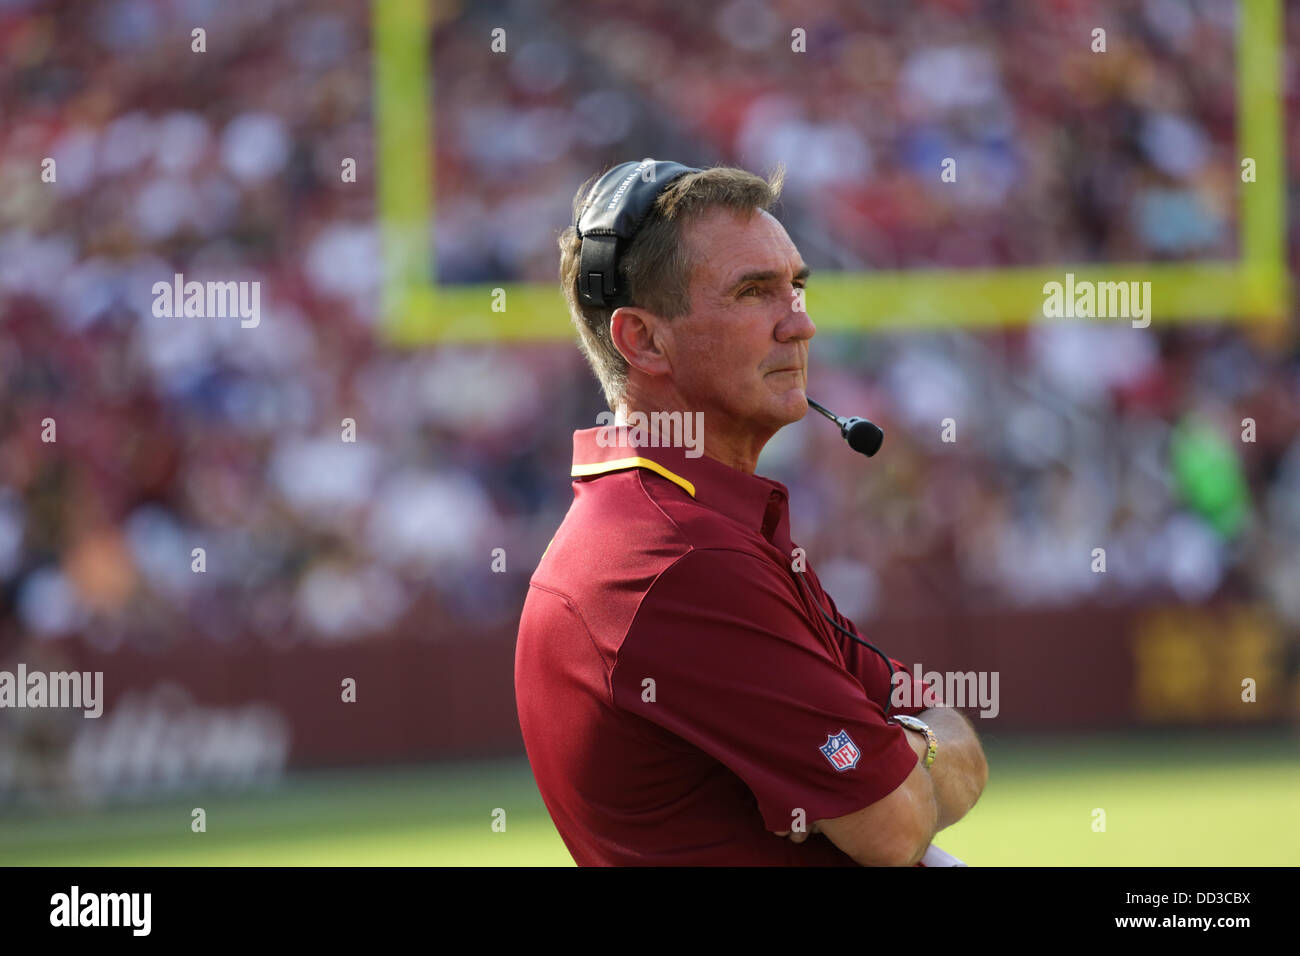 Saturday August 24th, 2013, Washington Redskins hosts the Buffalo Bills at FedEx Field in Landover Maryland for the third preseason game. Washington Redskins win 30-7. Head Coach Mike Shanahan of the Washington Redskins watches his players from the sideline. Credit:  Khamp Sykhammountry/Alamy Live News Stock Photo